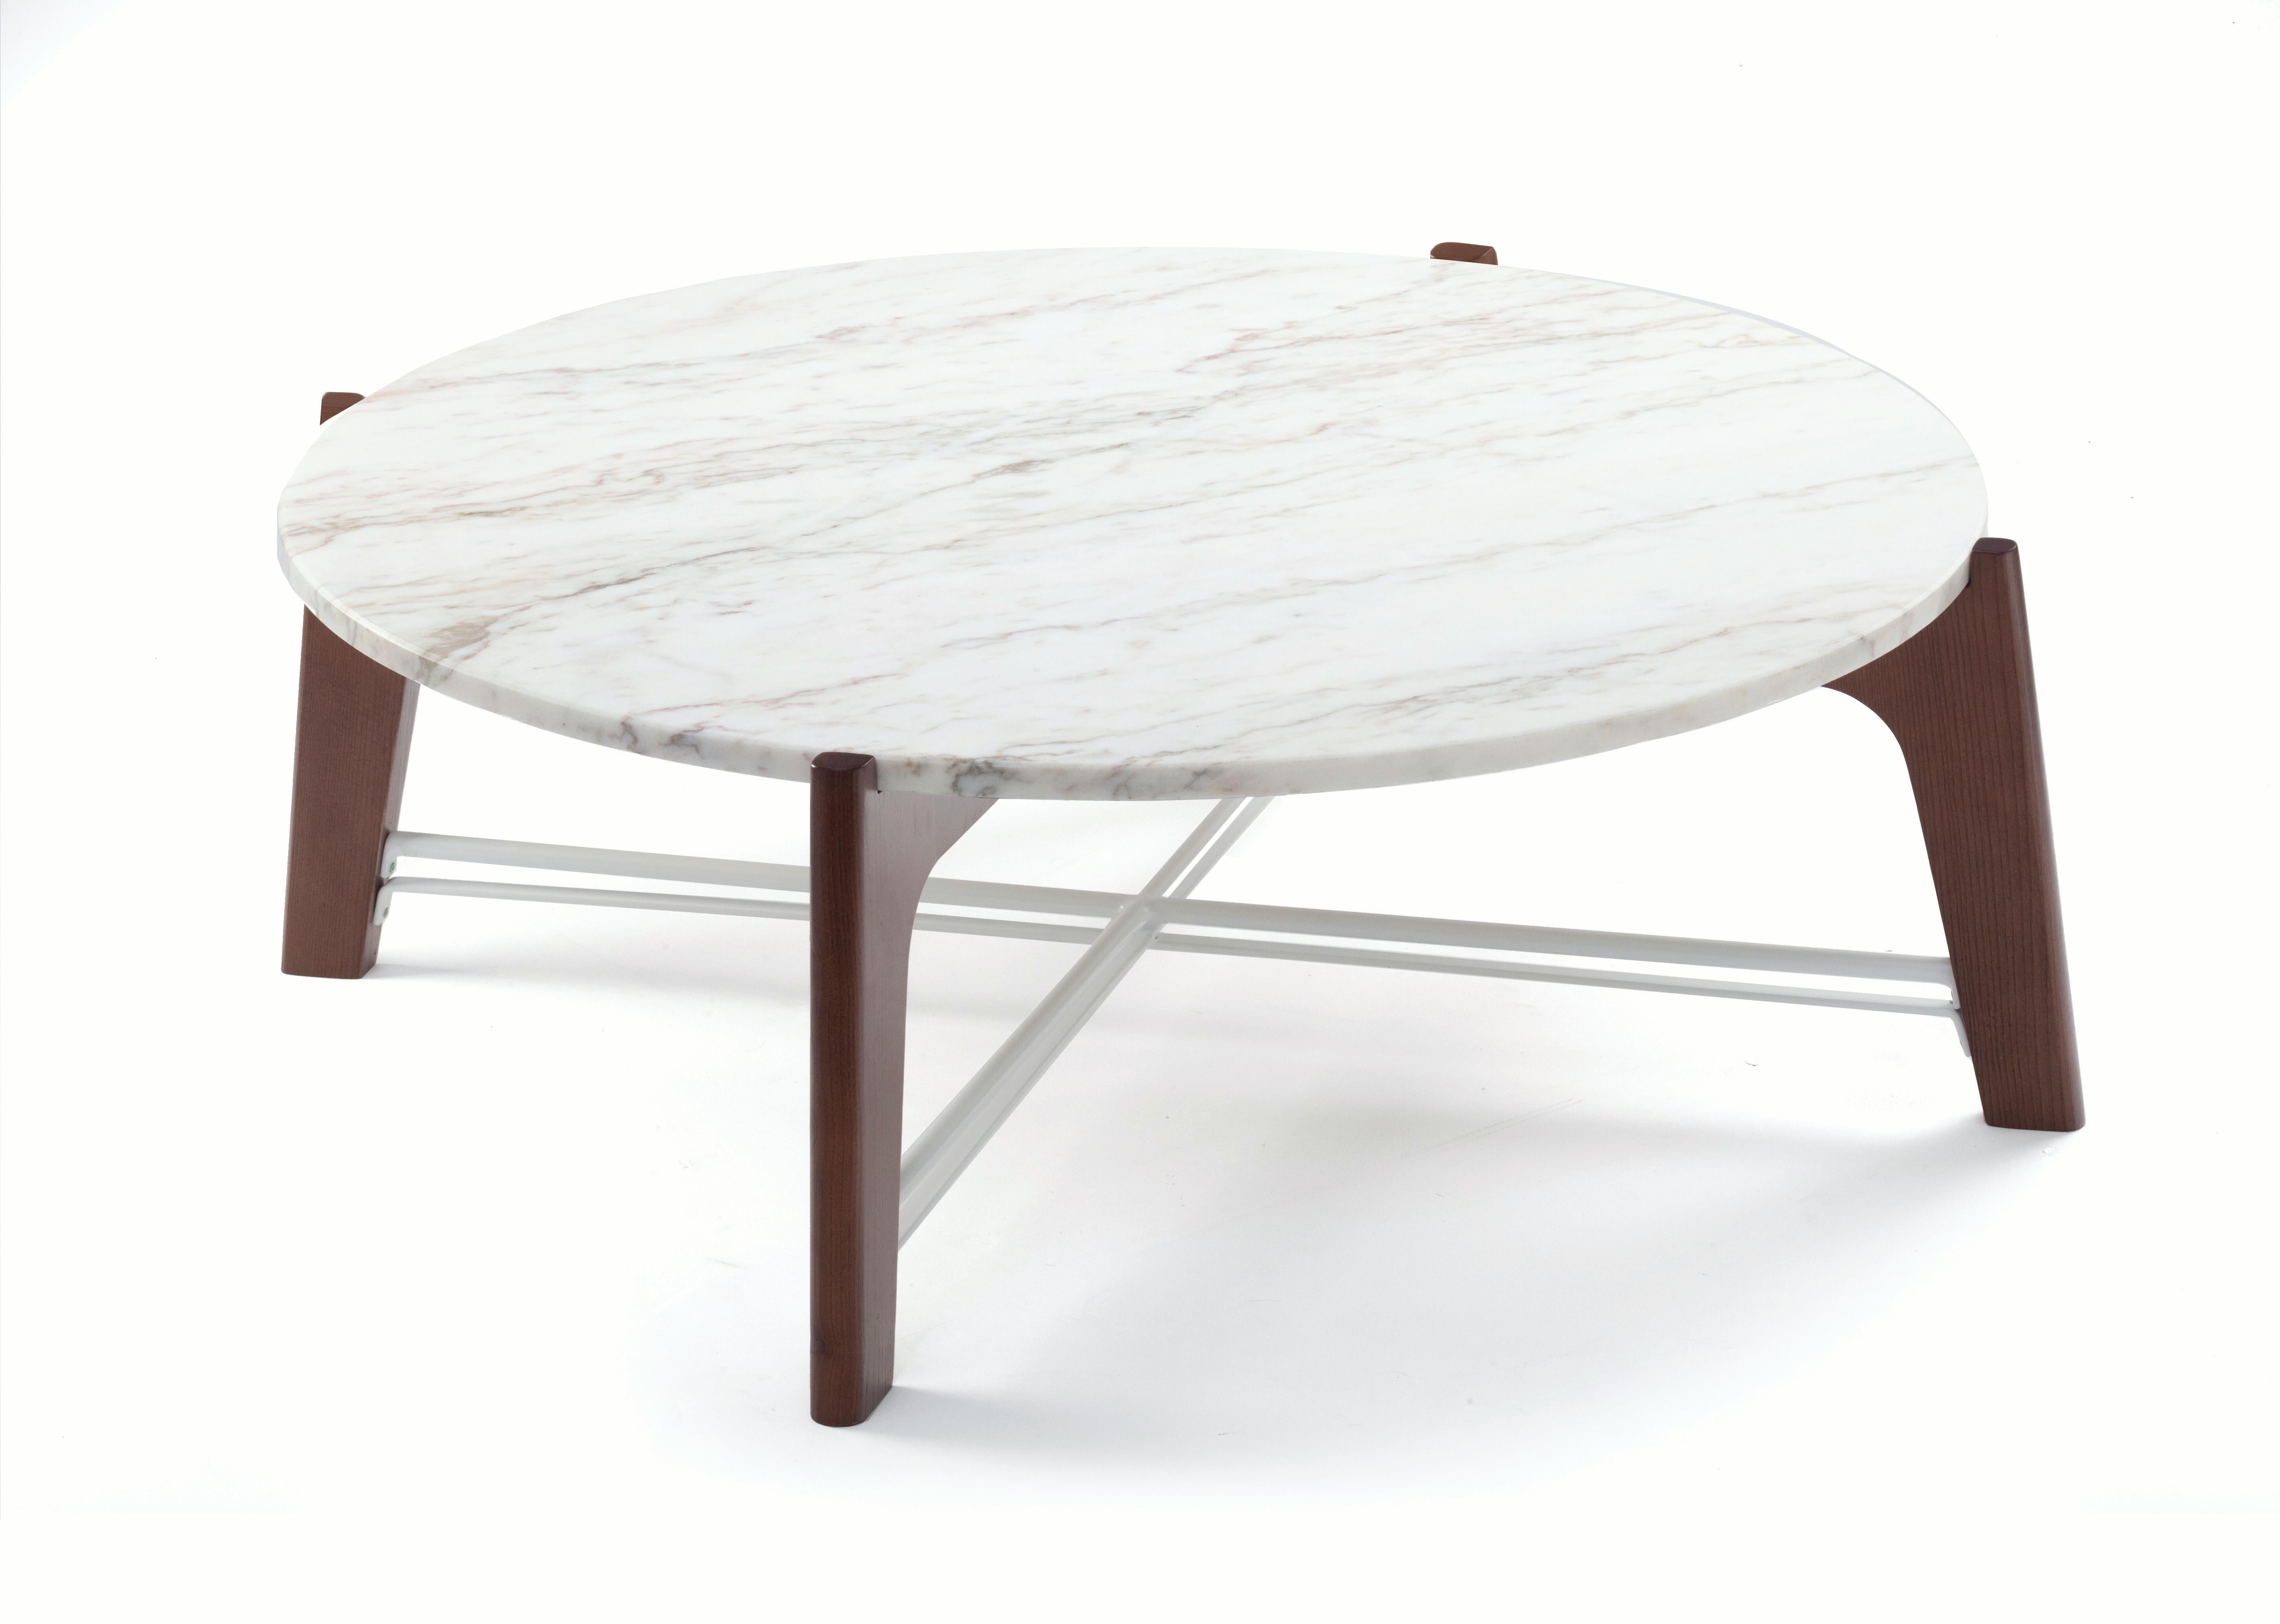 Flex center table has a solid beech wood base shaped elegantly, completed with a lacquered metal structure and receives a table top in Estremoz white marble. Made to Order. 

For sales with delivery address within European territories, VAT will be